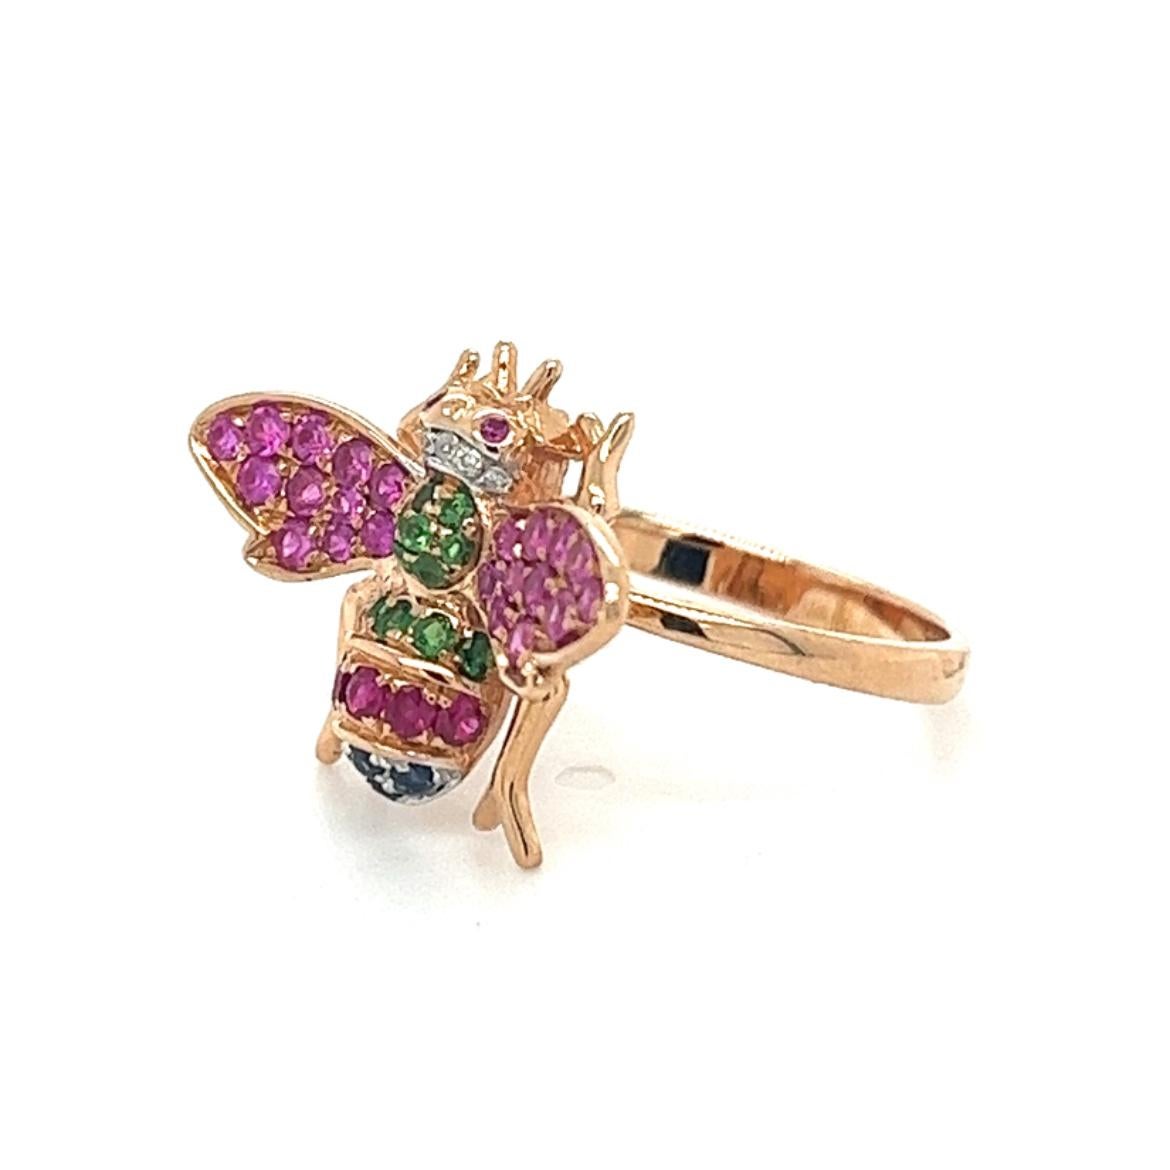 18K Rose Gold Bee Ring with
Diamonds & Pink Sapphires 
& Green Garnets

7 Rubies - 0.12 CT 
4 Blue Sapphires - 0.05 CT 
5 Diamonds - 0.02 CT 
12 Green Garnets - 0.13 CT 
22 Pink Sapphires - 0.31 CT 
18K Rose Gold -  4.07 GM

Discover the essence of